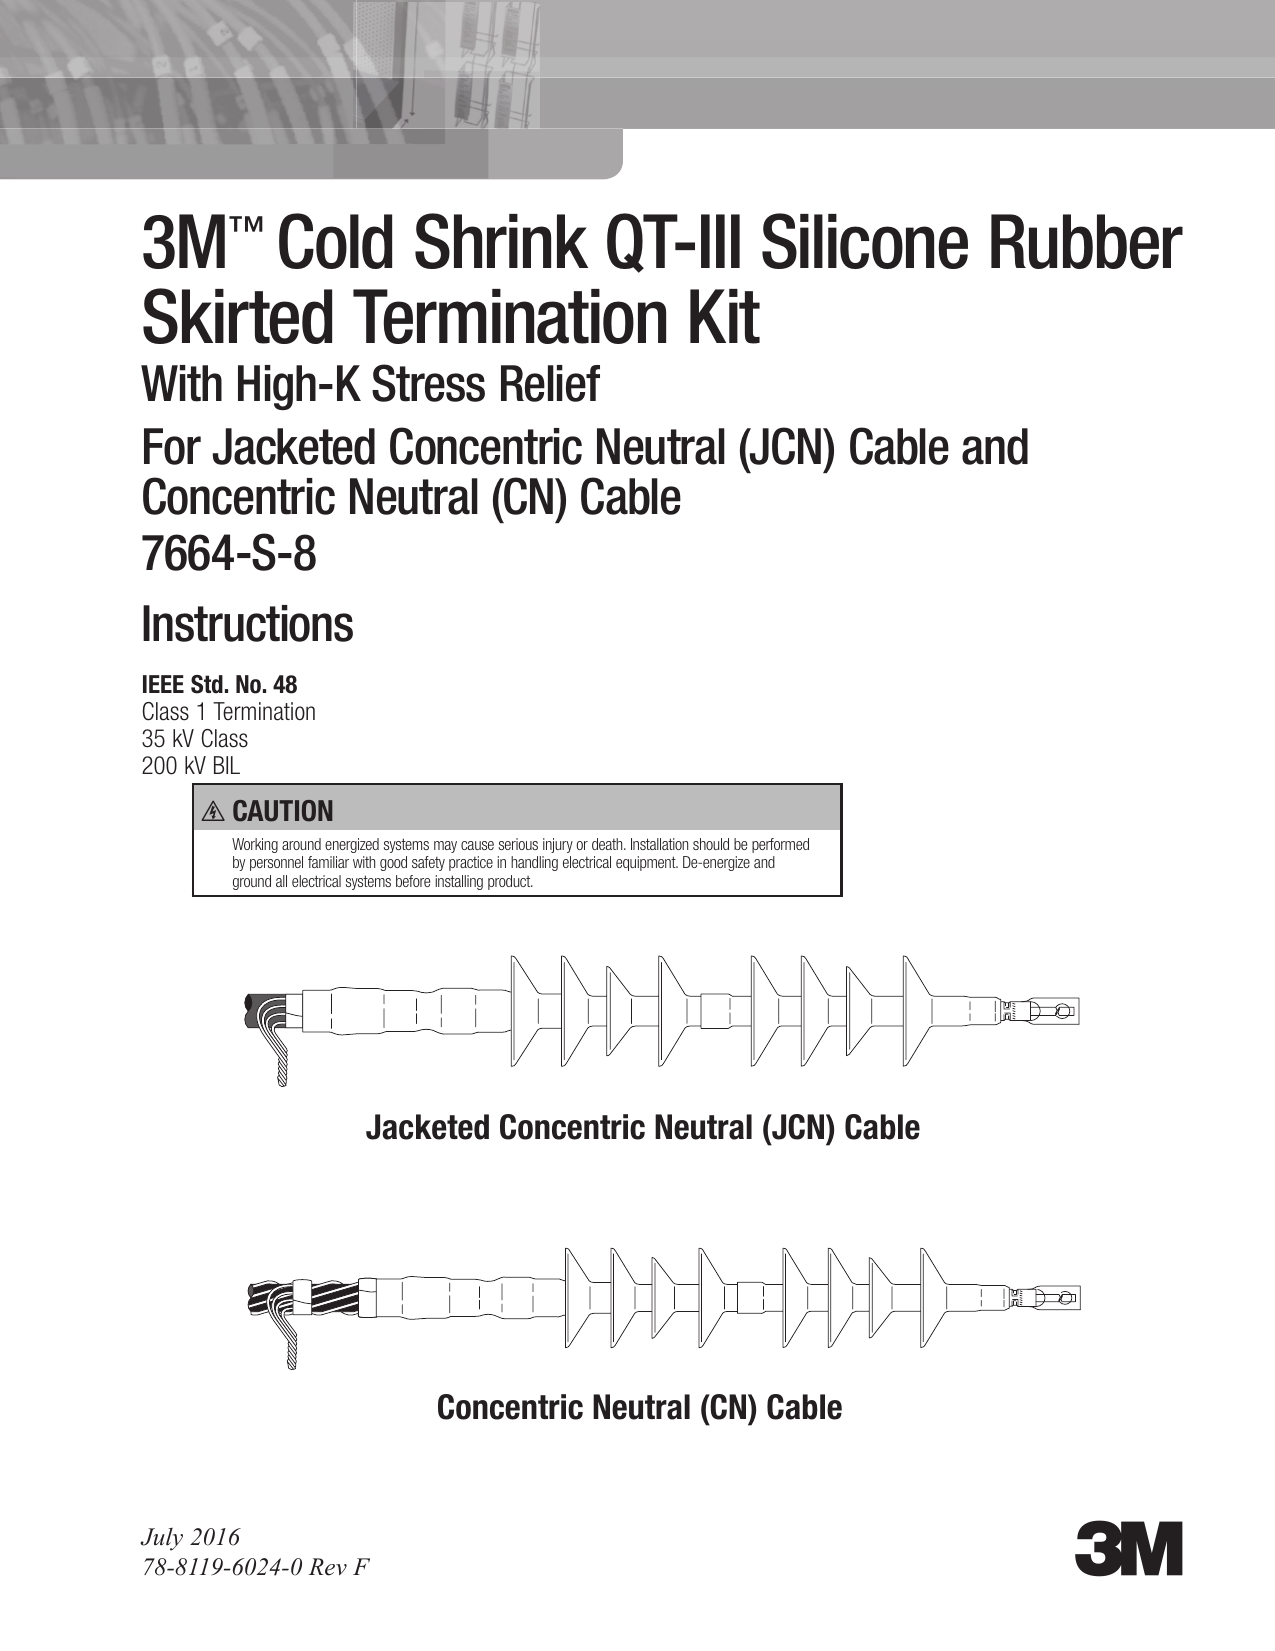 3m Cold Shrink Qt Iii Termination Kit 7664 S 8 Cn Jcn Cable 5 25 Kv Insulation Od 0 1 53 In 1 Kit Operating Instructions Manualzz